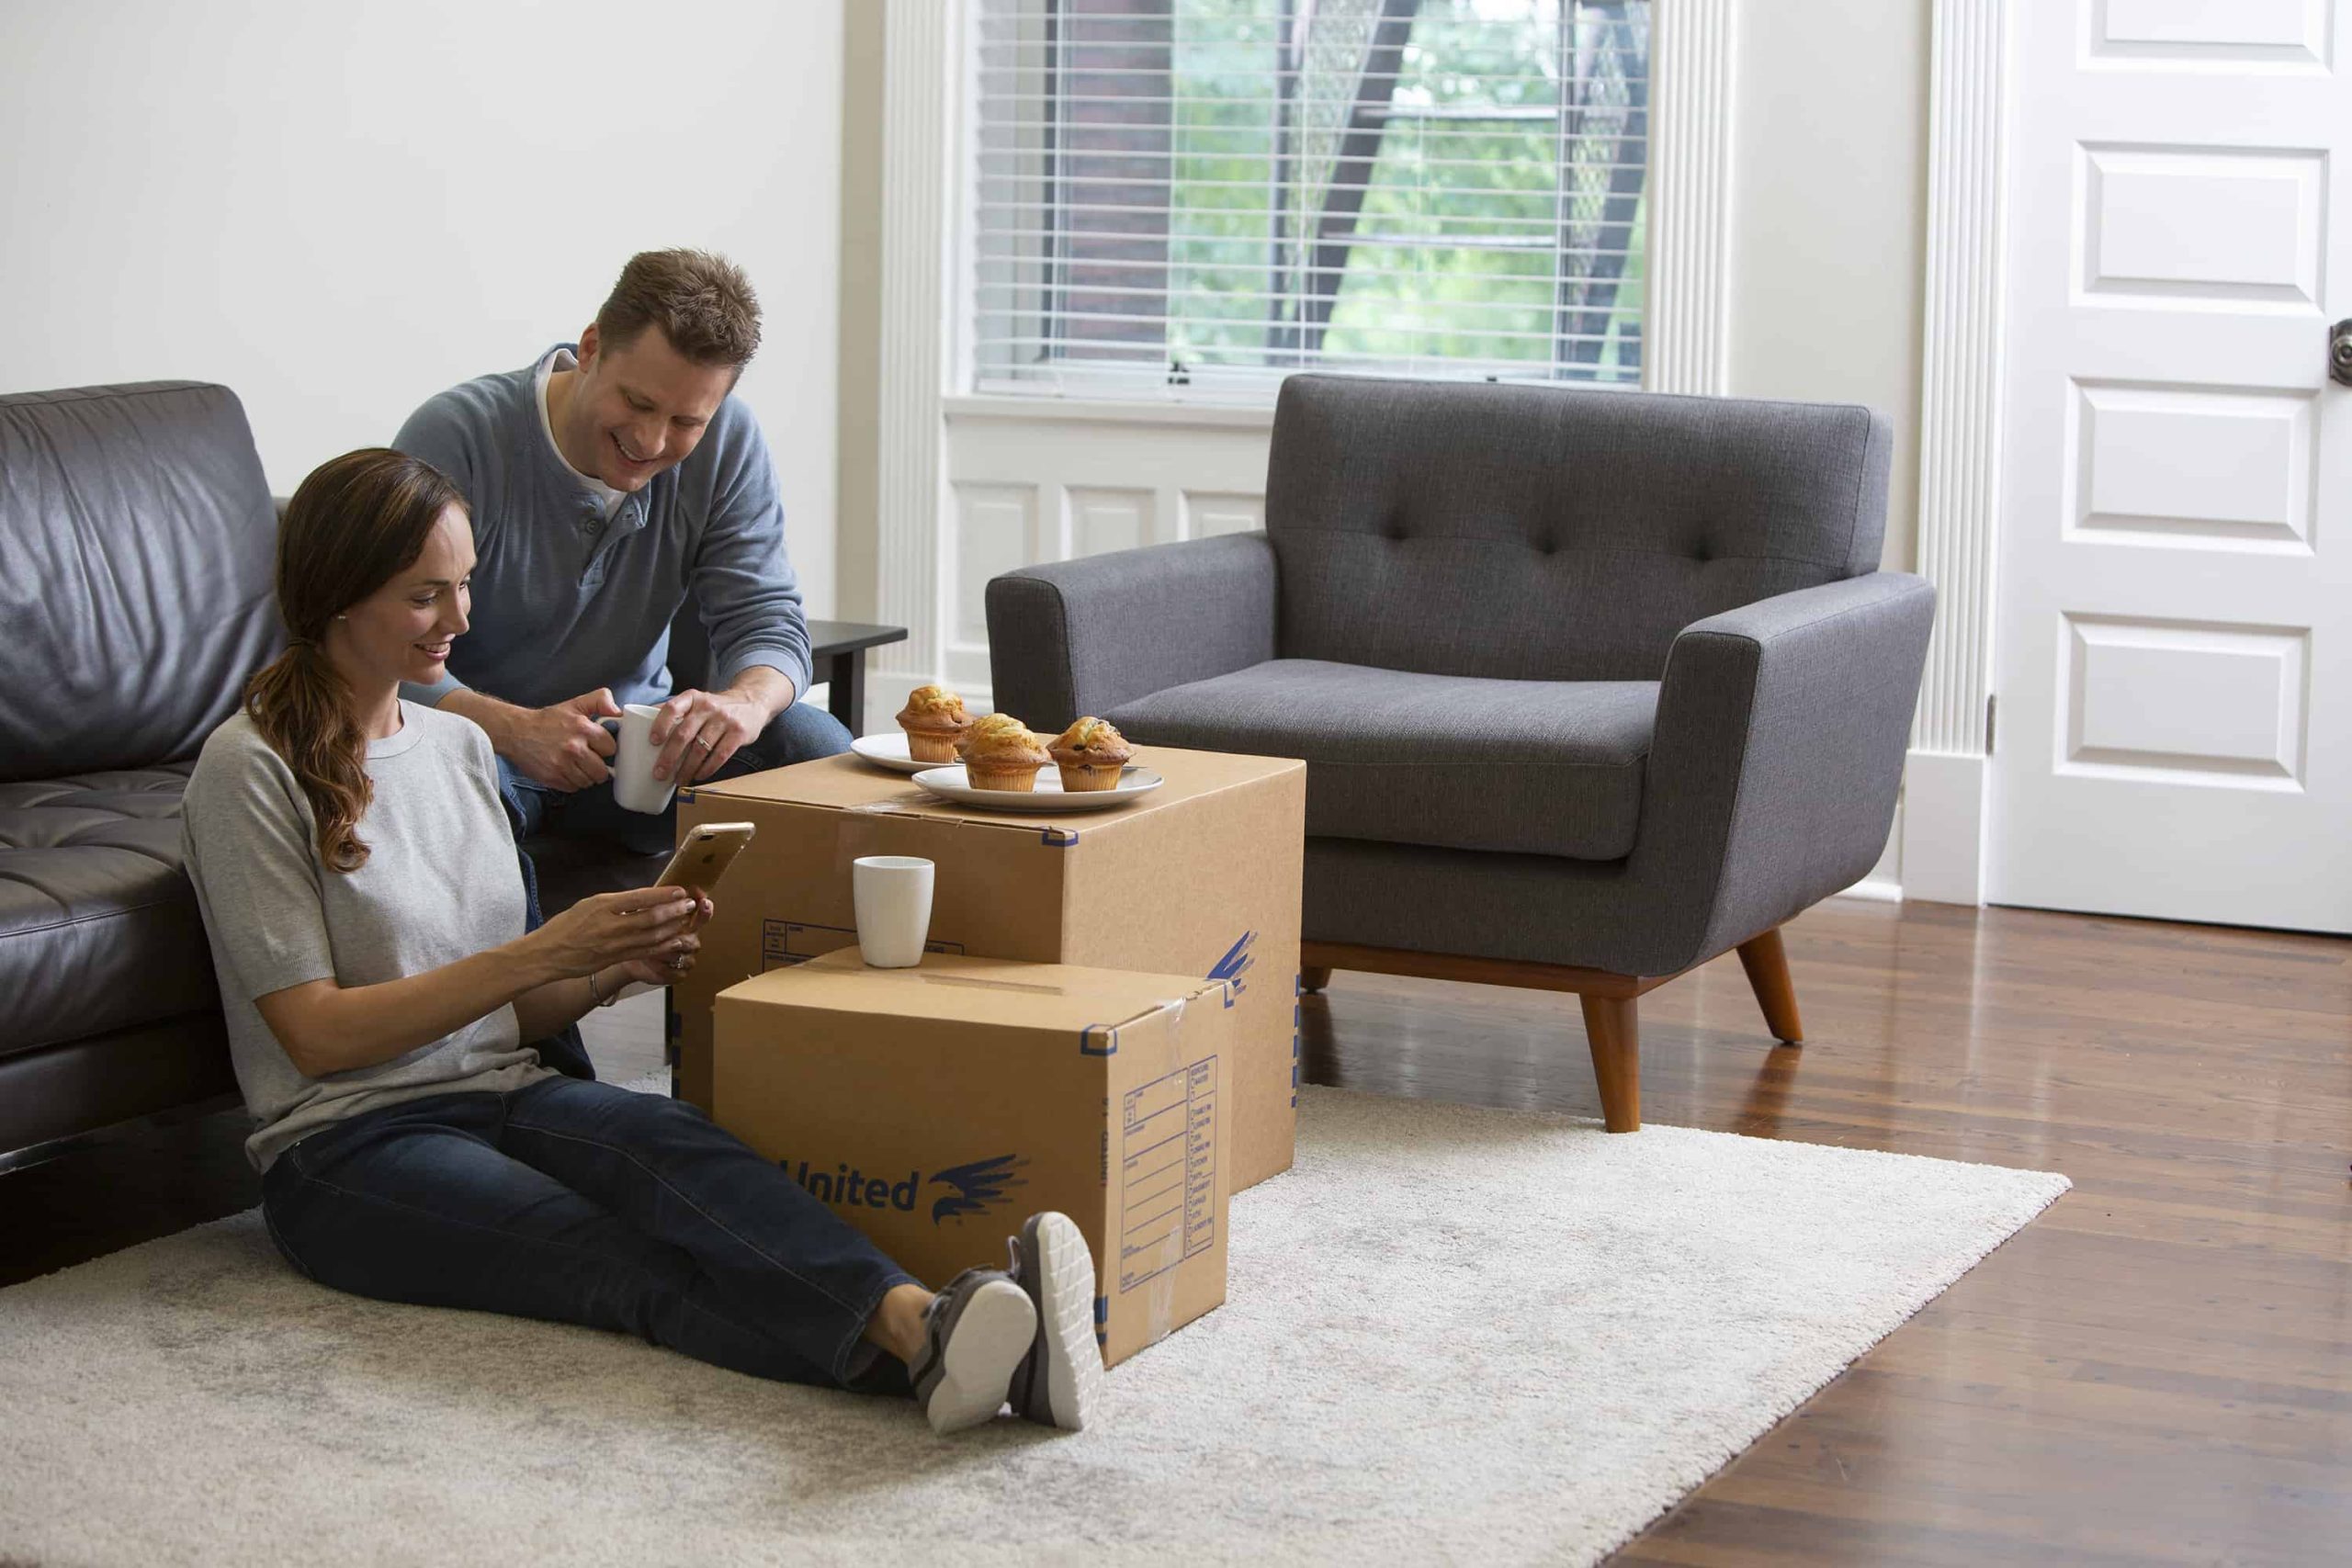 Why Summer Is the Peak Season for Moving?